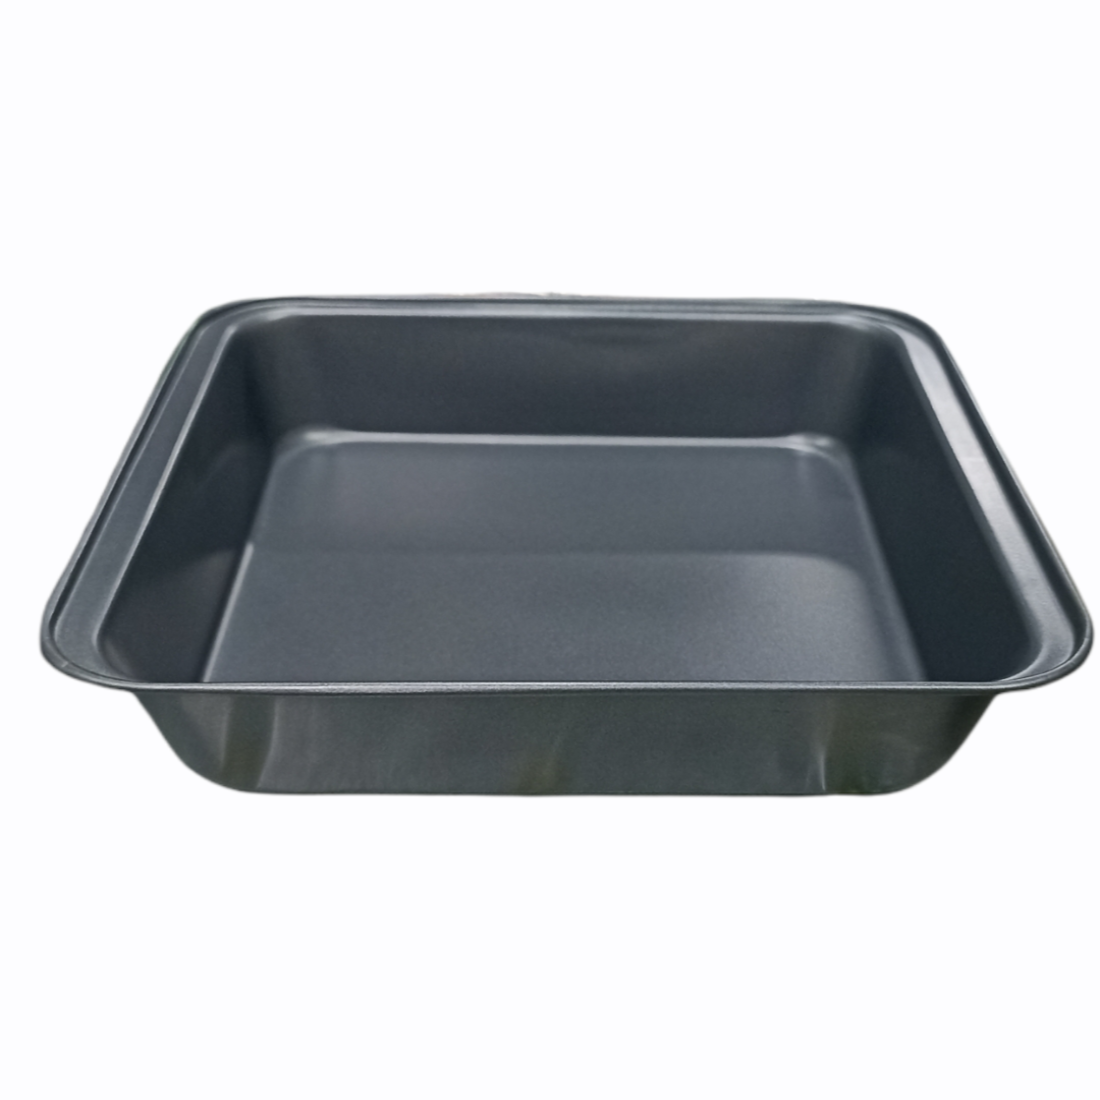 Aluminium Round Cake Pan Mould Cake Tin 7.5 Inches for Baking Half 1/2 kg  or 500 Grams in OTG/ Microwave/ Pressure Cooker